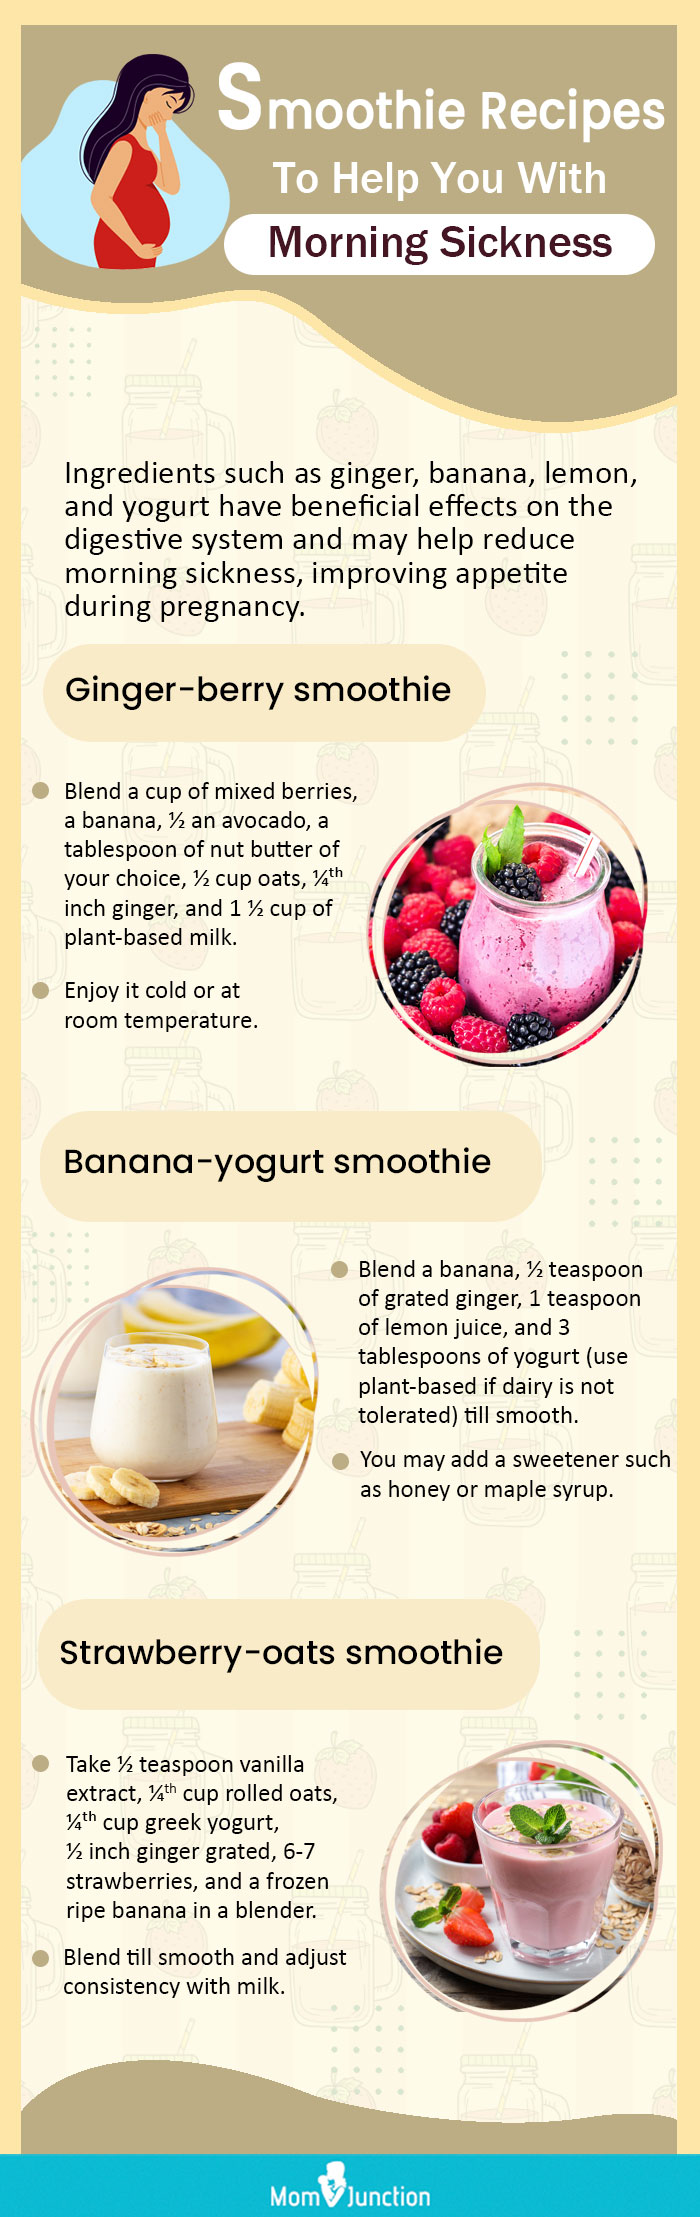 pregnancy smoothies to cope with morning sickness [infographic]